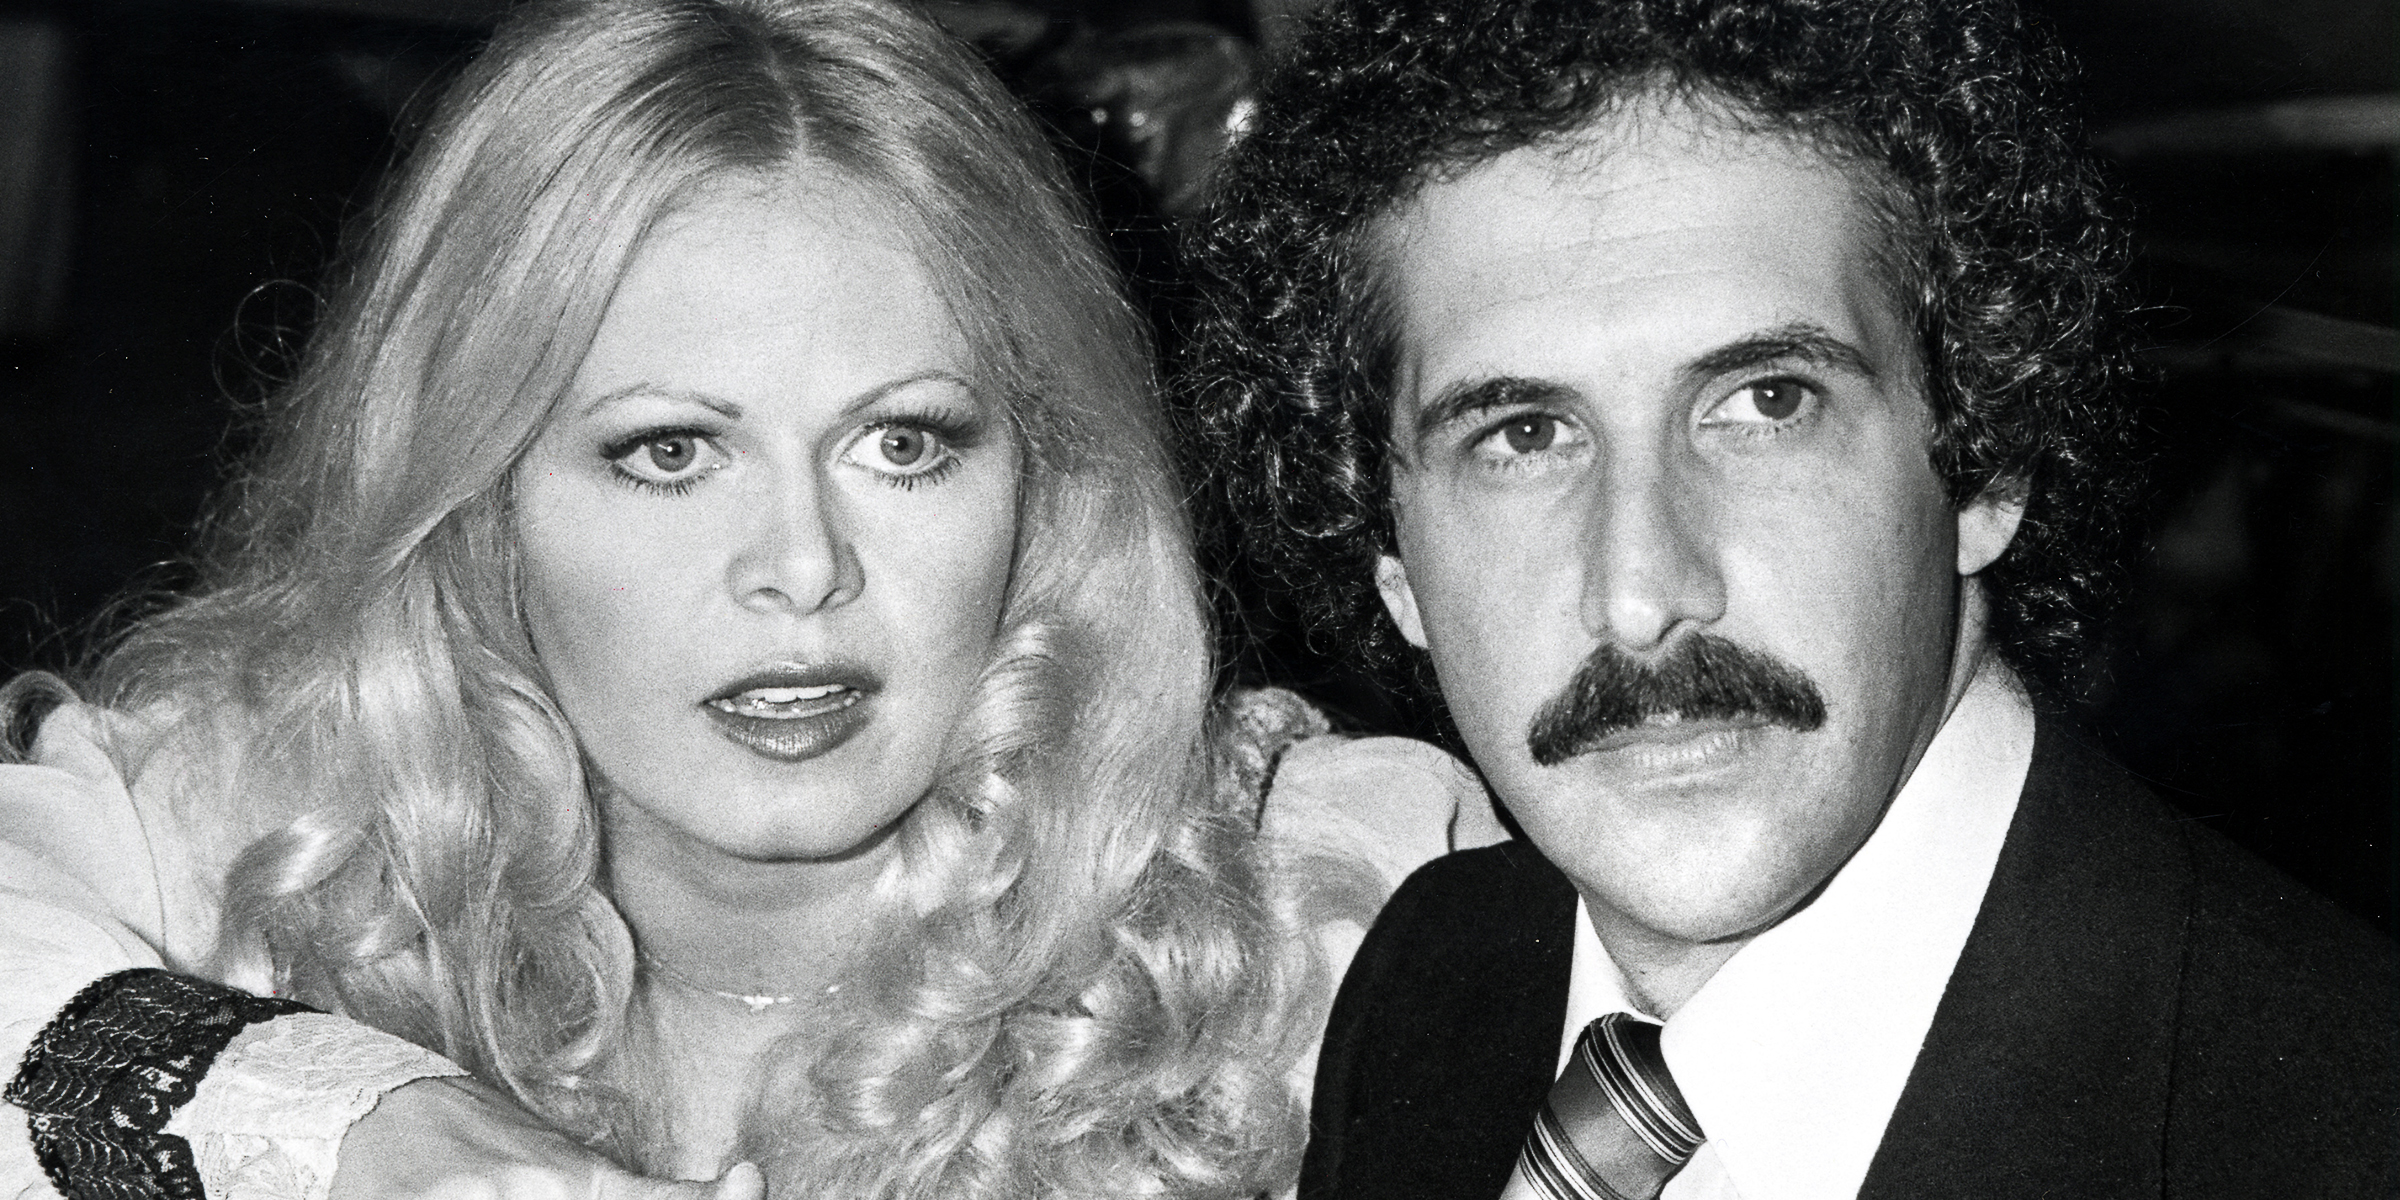 Sally Struthers and William C. Rader | Source: Getty Images